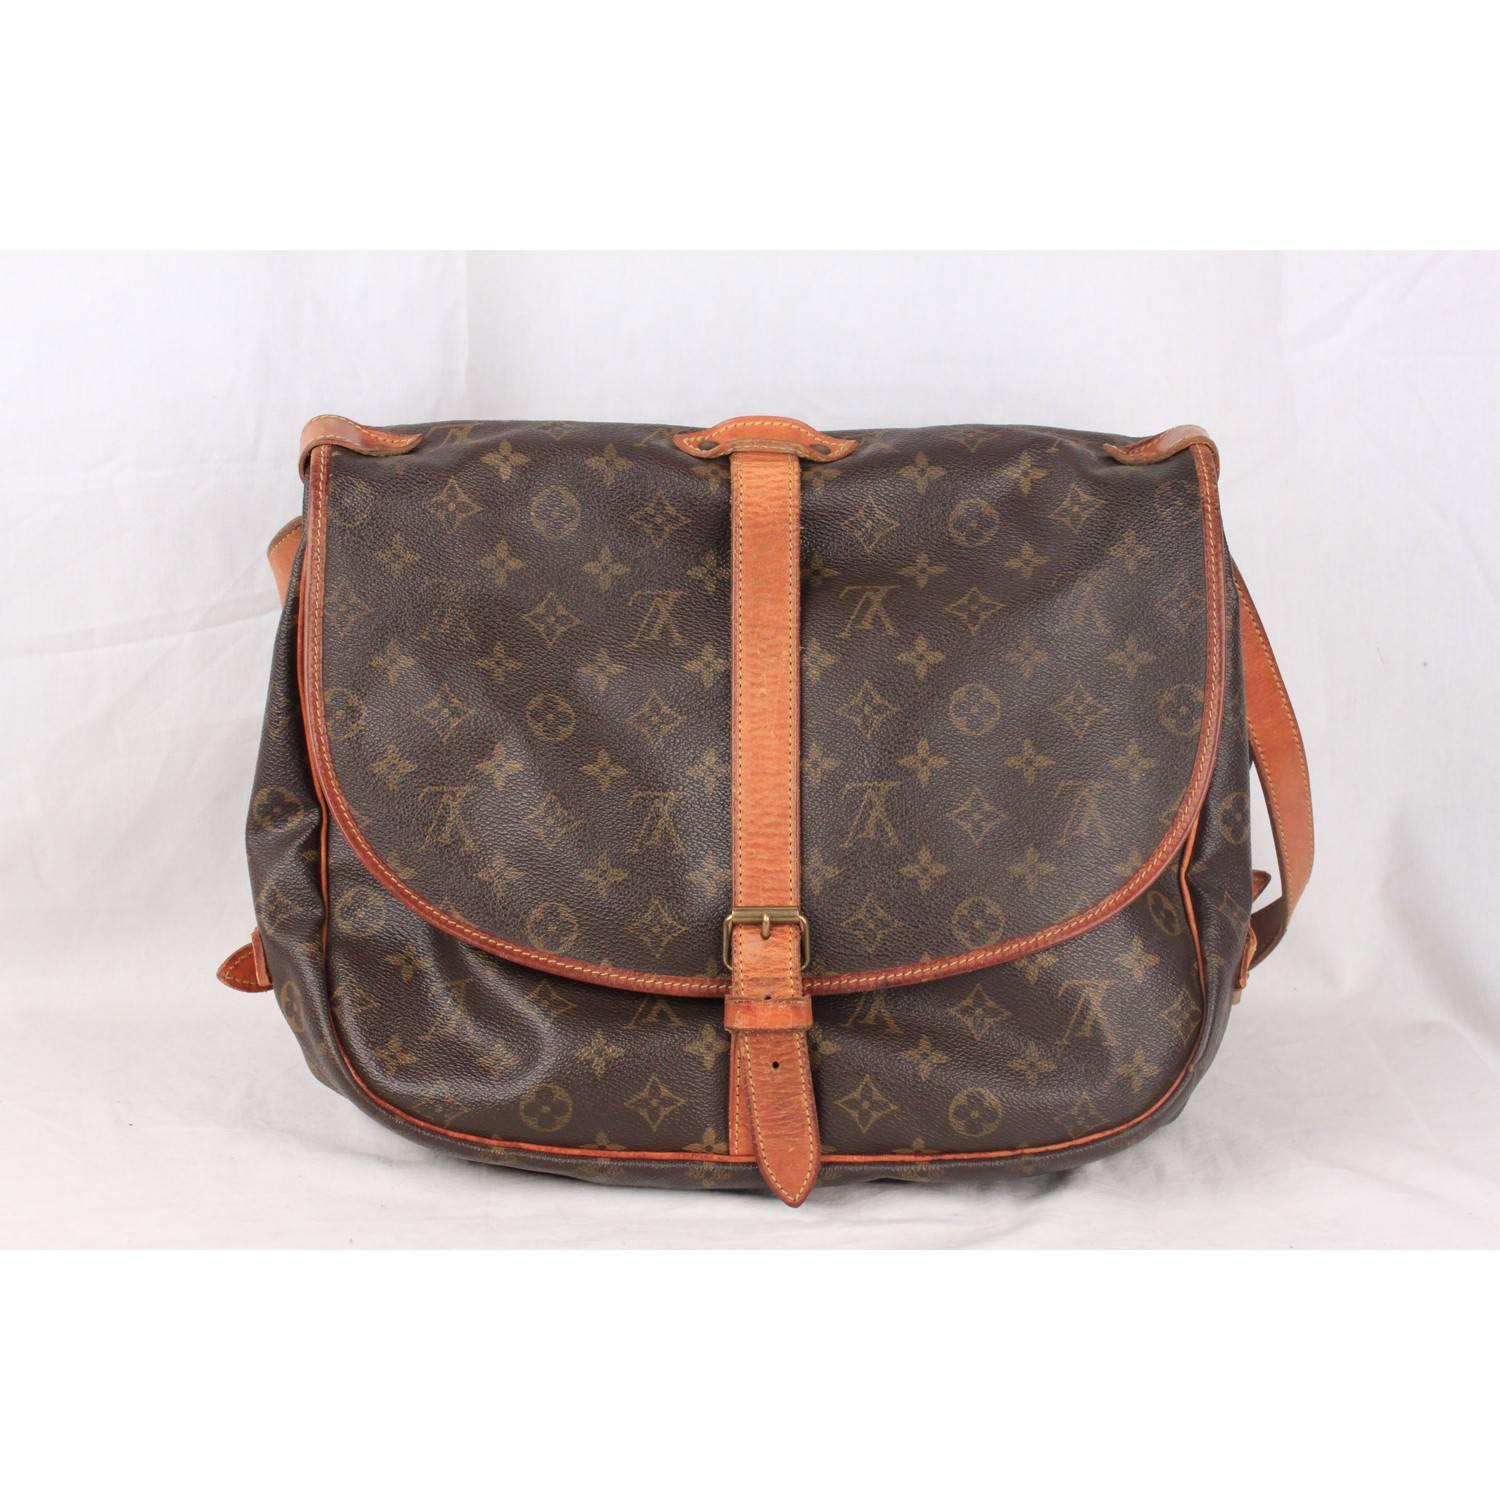 Rare Louis Vuitton Saumur 35 Messenger Bag. Discontinued model, very collectible. Inspired by equestrian 'SADDLE' bag, the legendry SAUMUR 35 features dual front compartments, held tightly together at the sides with belt-like tabs. The extra-large